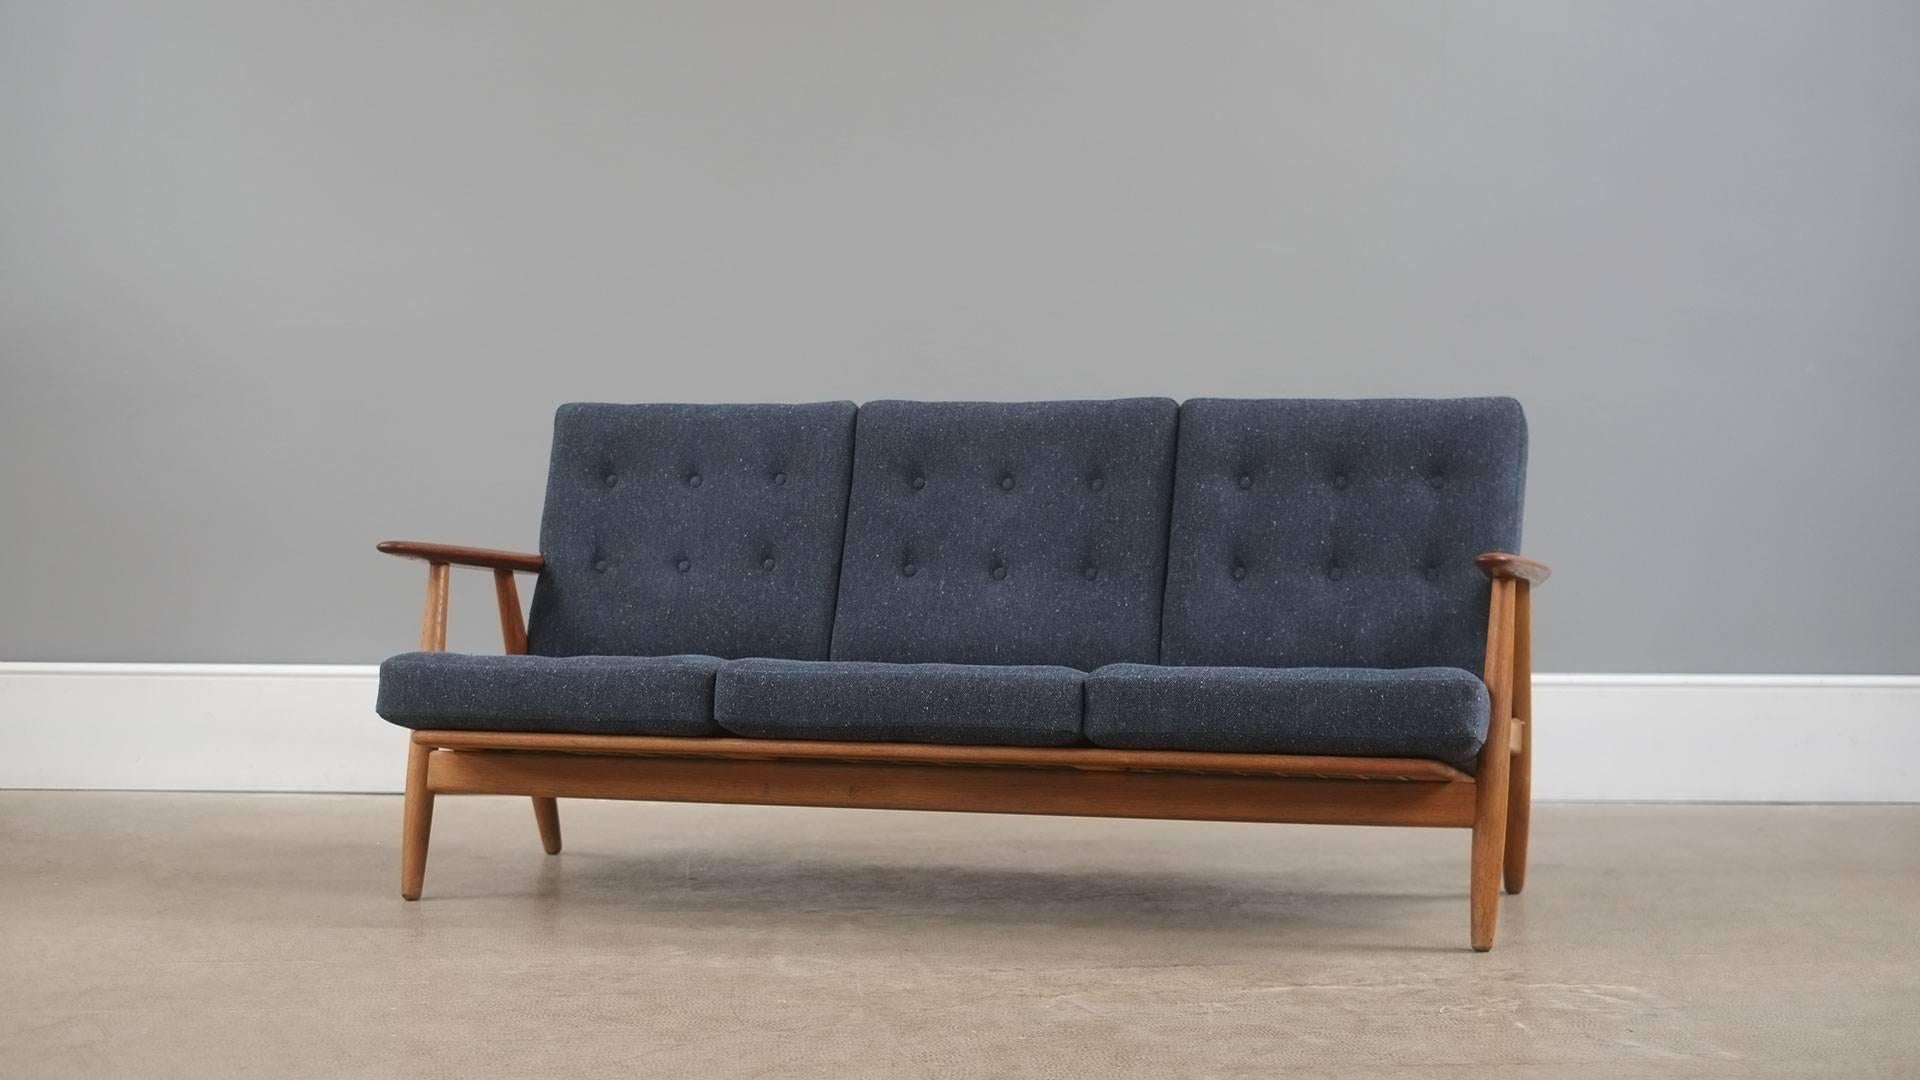 Wonderful Cigar sofa by Hans Wegner for Getama, Denmark. Solid oak frame with contrasting teak arms.  Fully reconditioned original sprung cushions with new Fleck ink upholstery. Matching chair available.
 
 